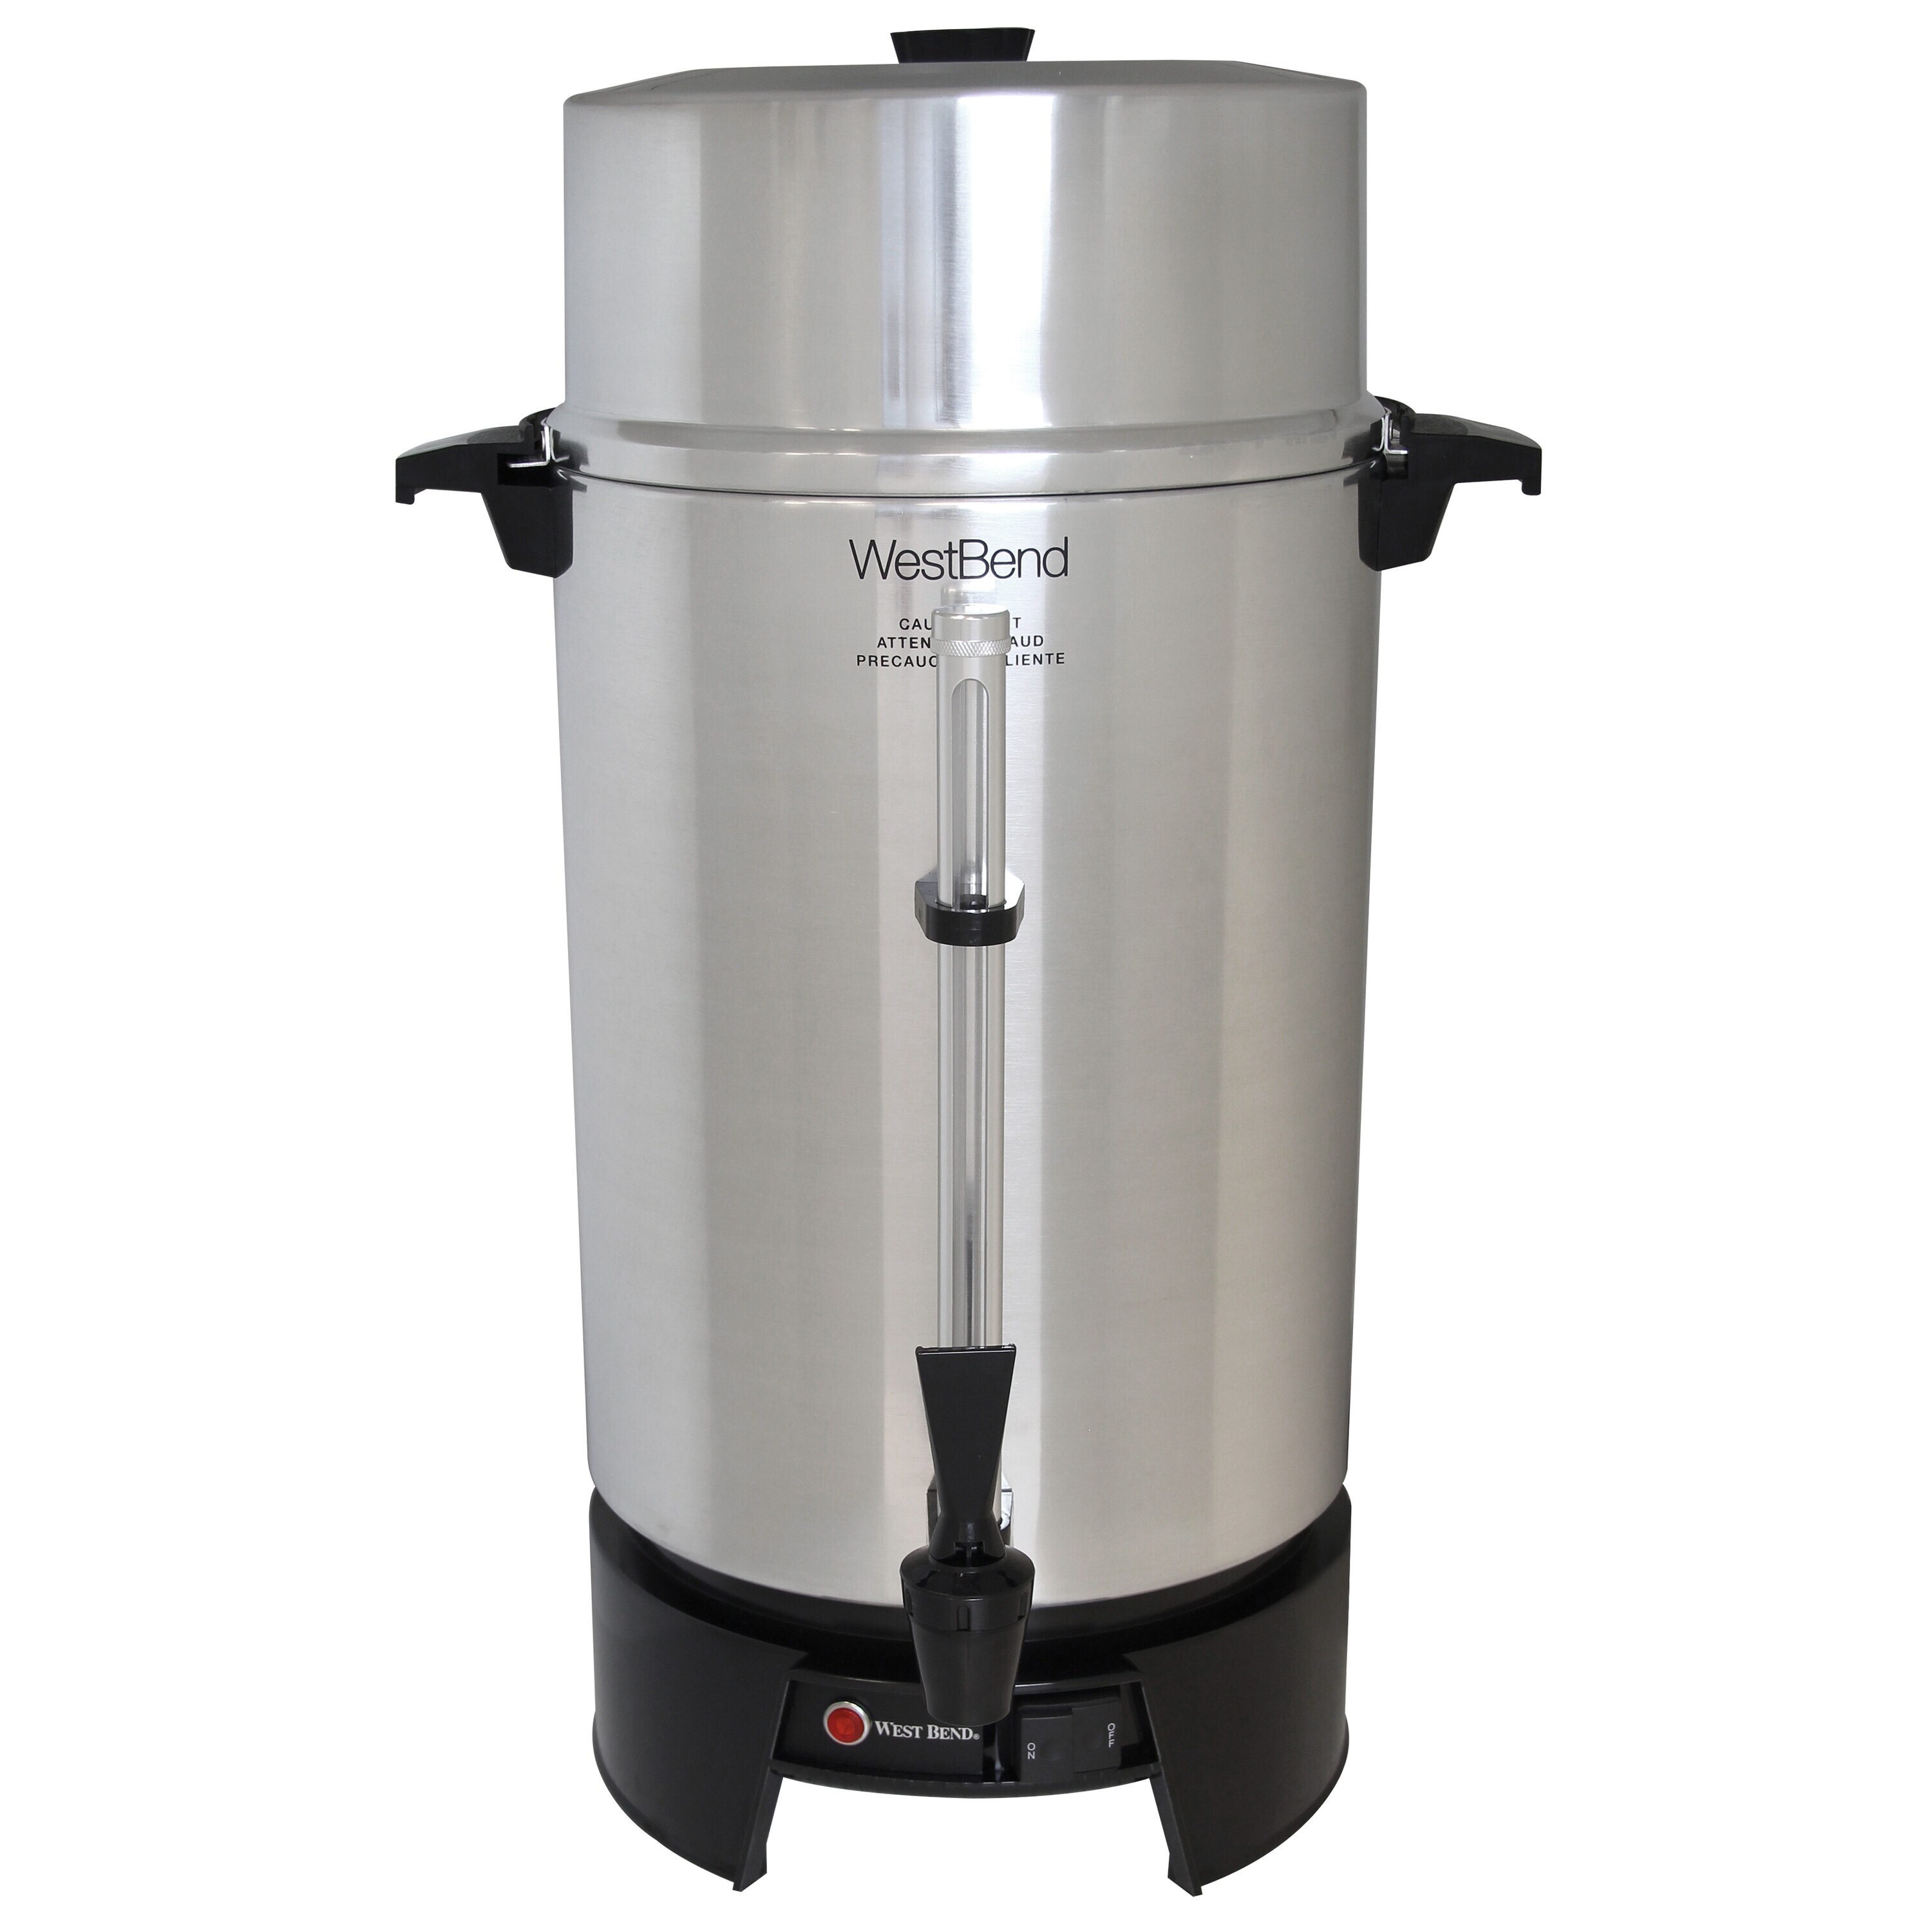 Zulay Premium Commercial Coffee Urn - 100 Cup